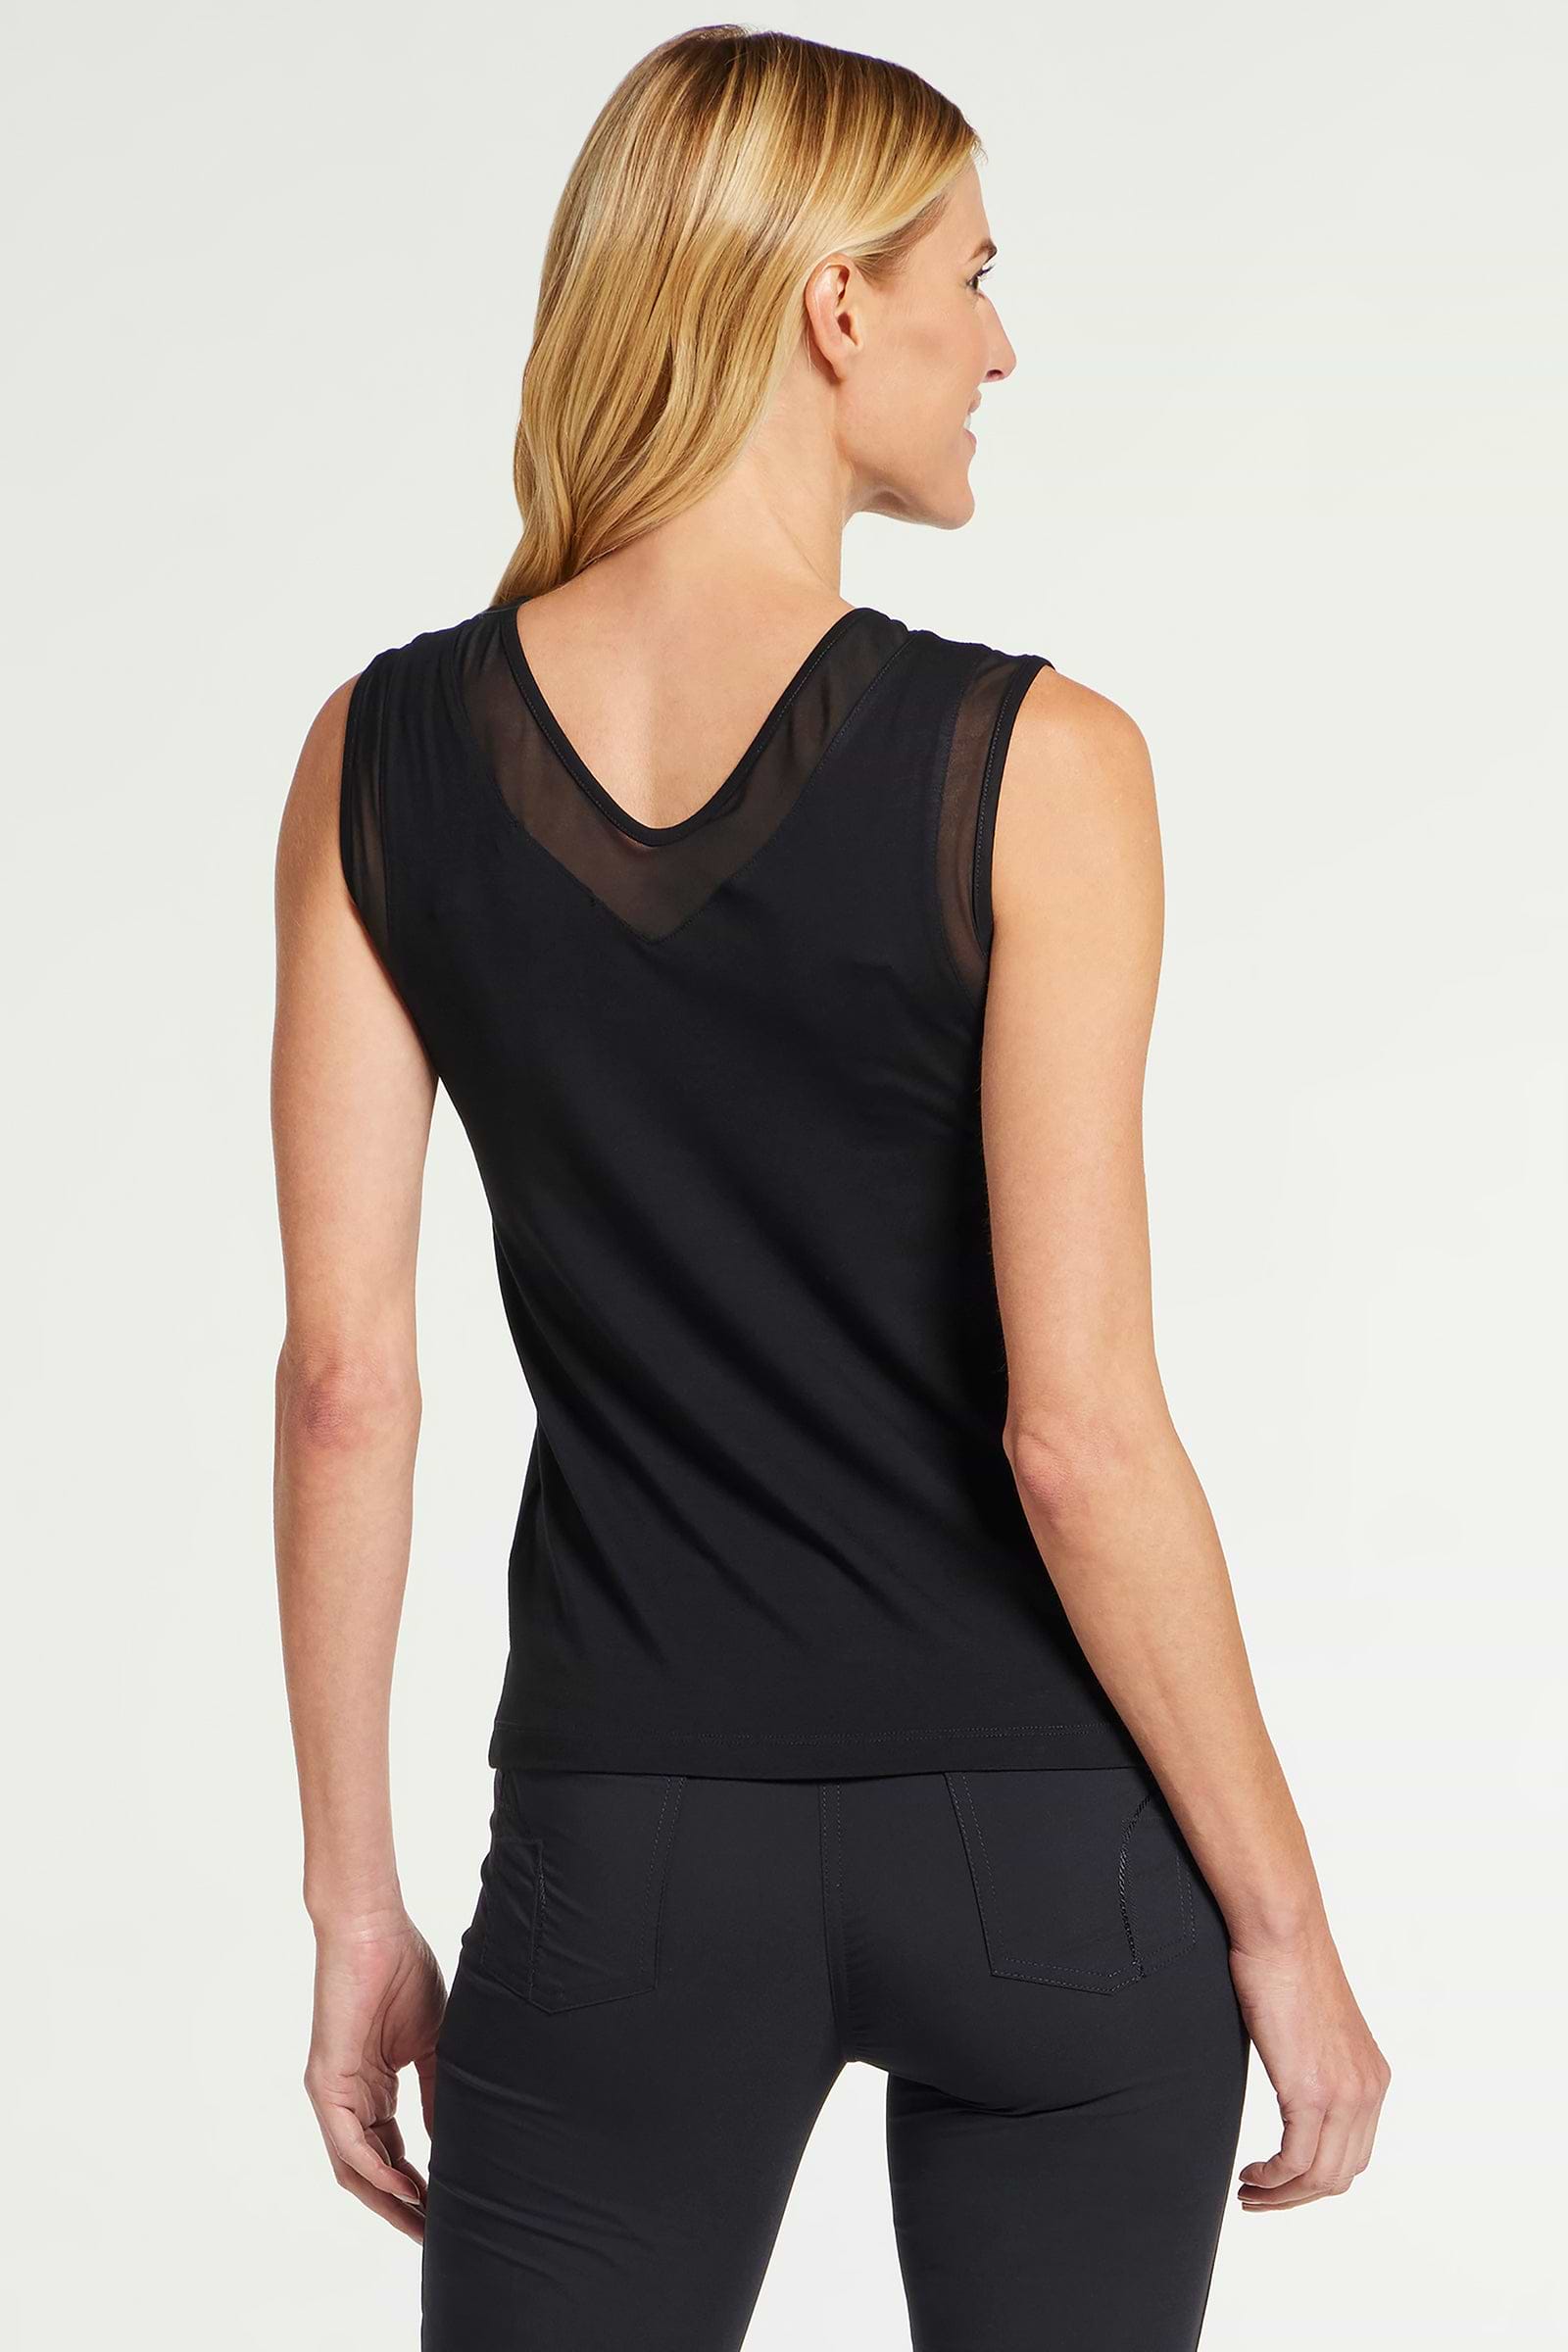 The Best Travel Tank Top. Woman Showing the Back Profile of a Jackson Pima Tank in Black.